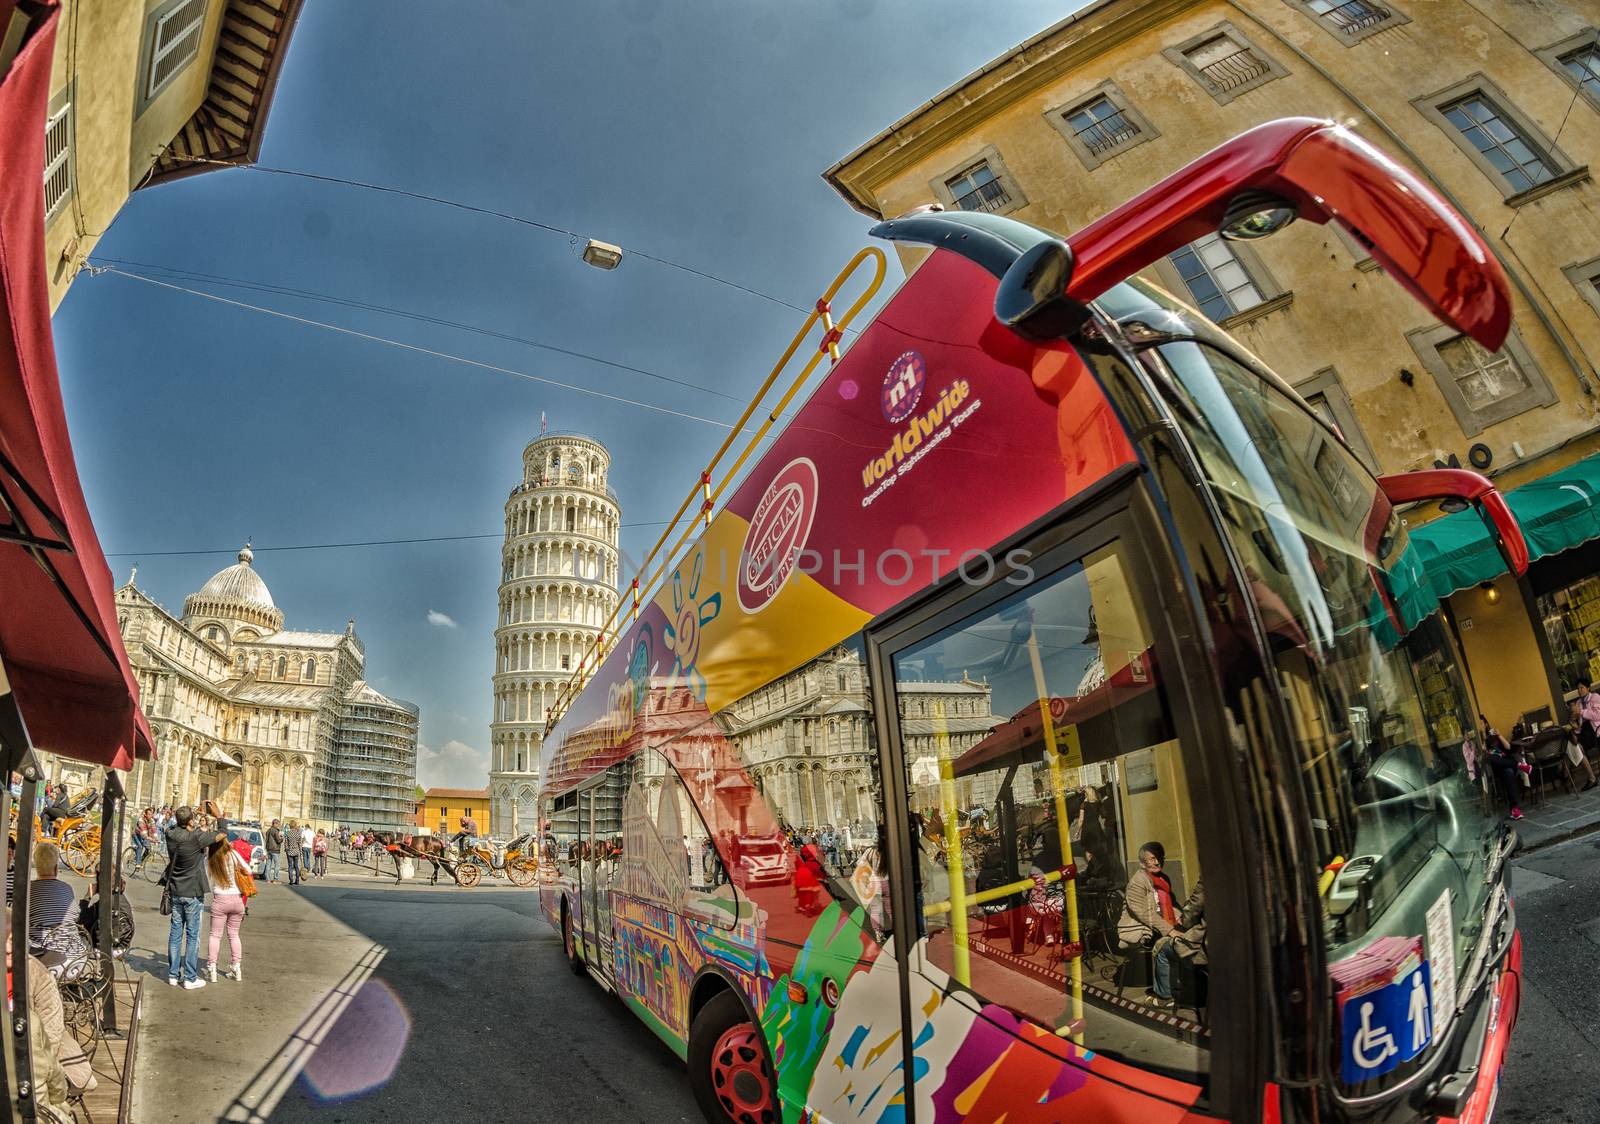 PISA, ITALY - MAY 12, 2014: Sightseeing bus in Square of Miracle by jovannig